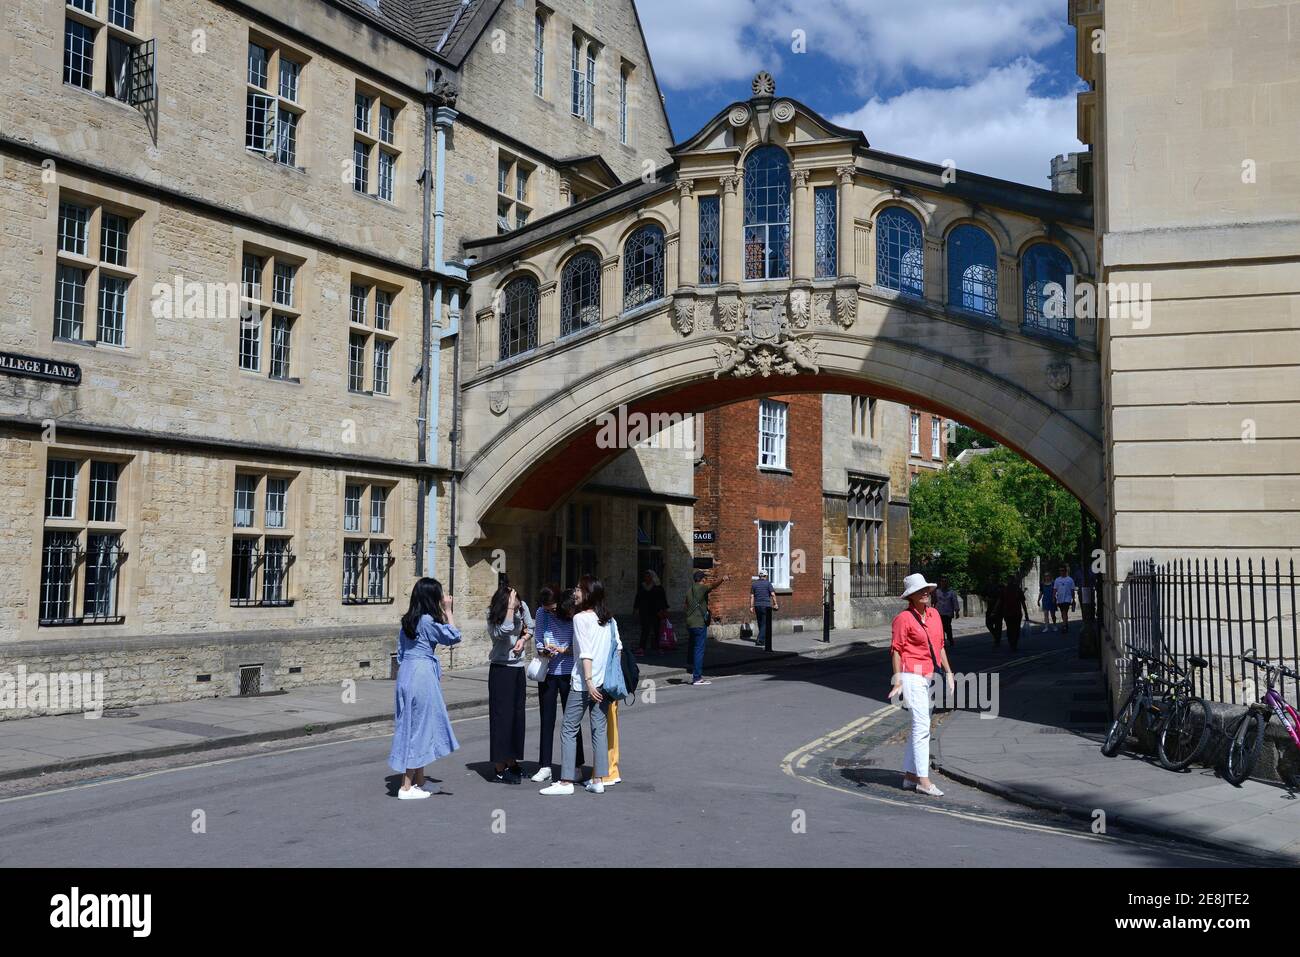 The Bridge of Sighs, England, Great Britain, Bridge of Sighs, Oxford, Oxfordshire Stock Photo